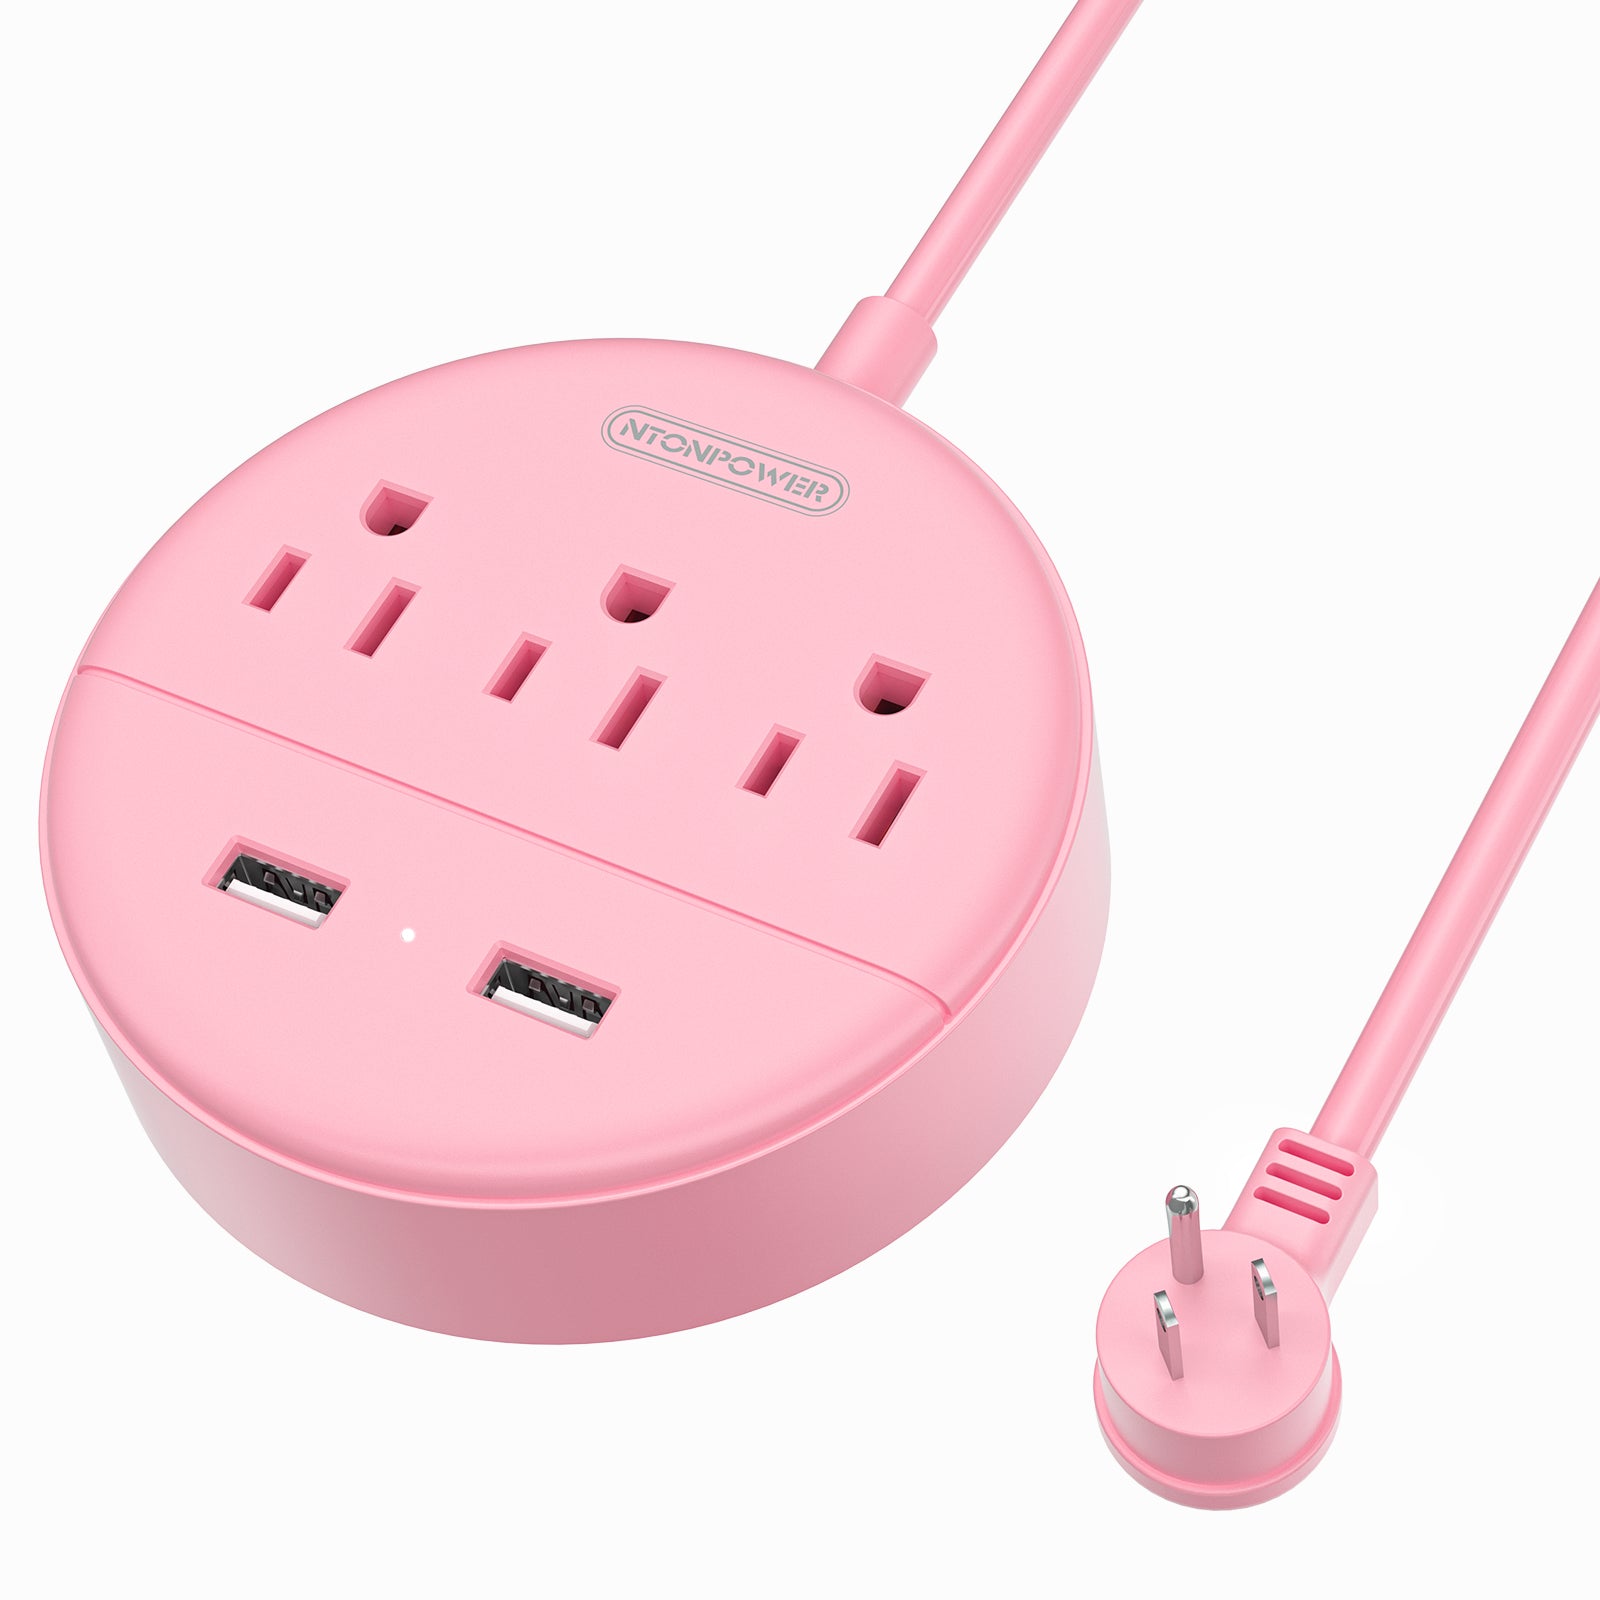 Ntonpower Dot Power Strip 3 Outlets 2 USB Small & Travel